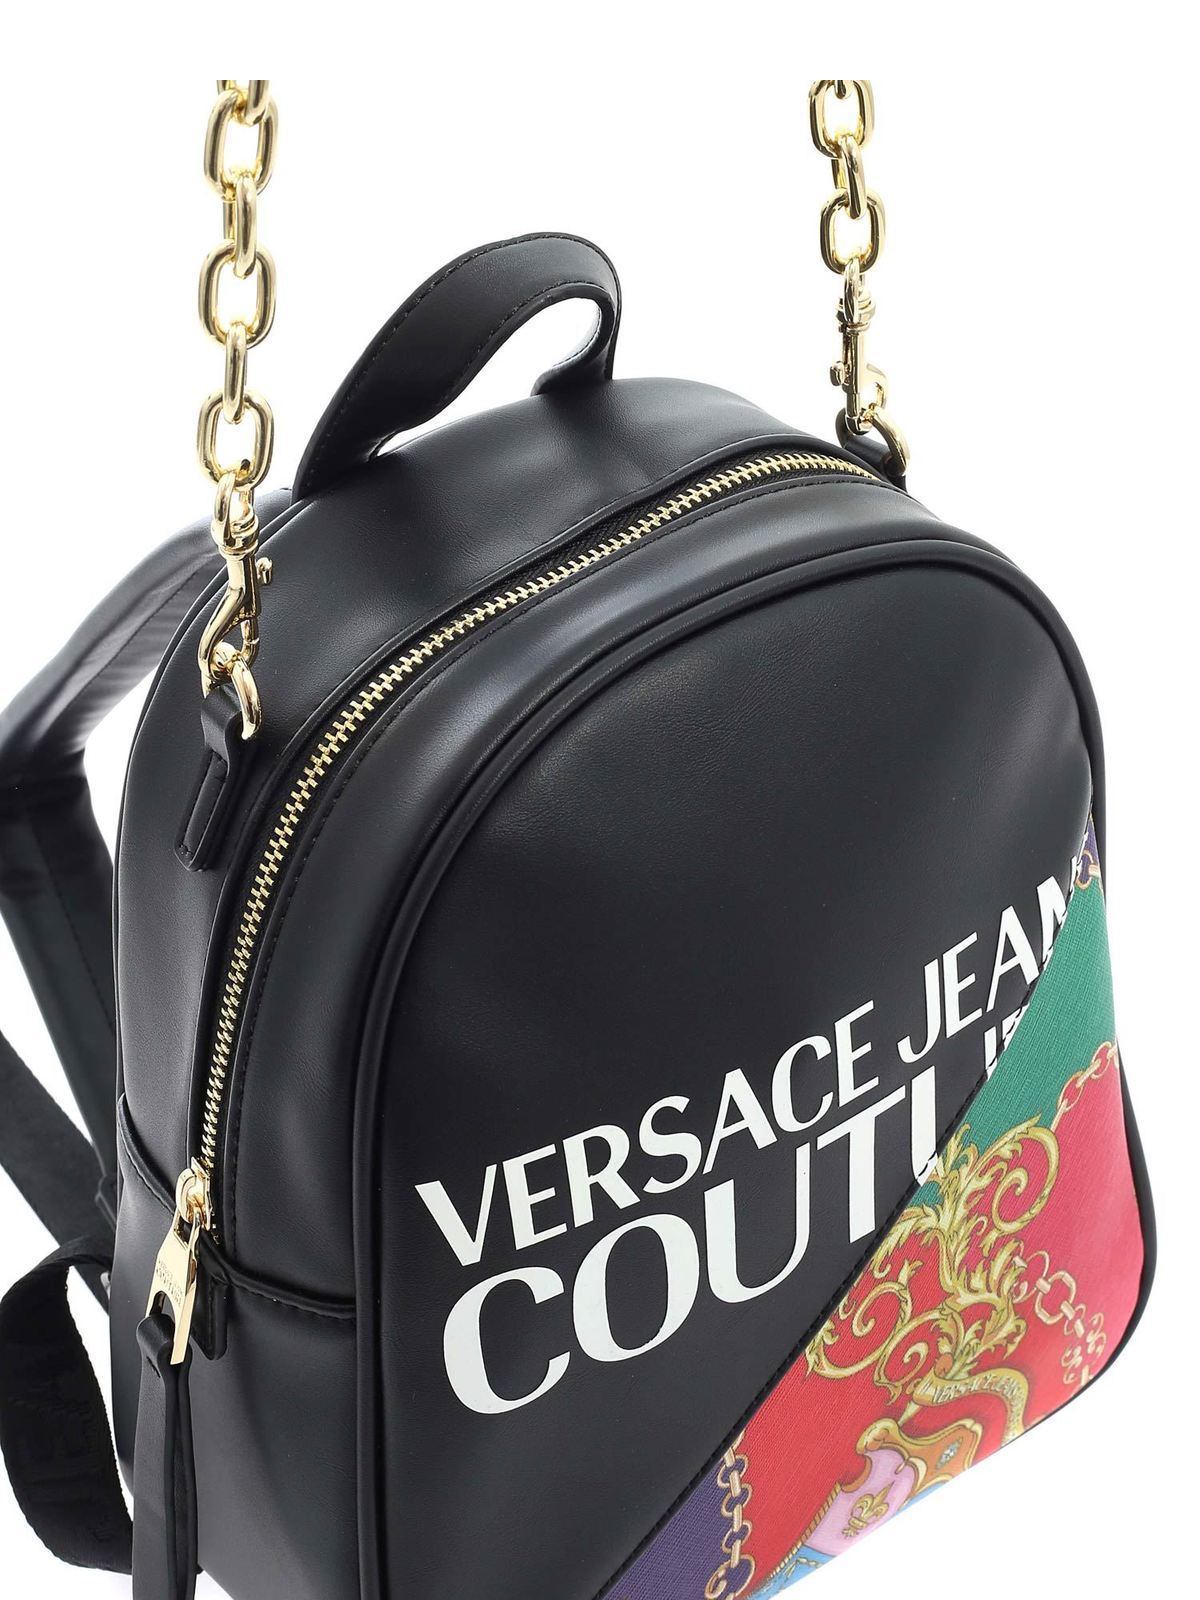 versace couture backpack